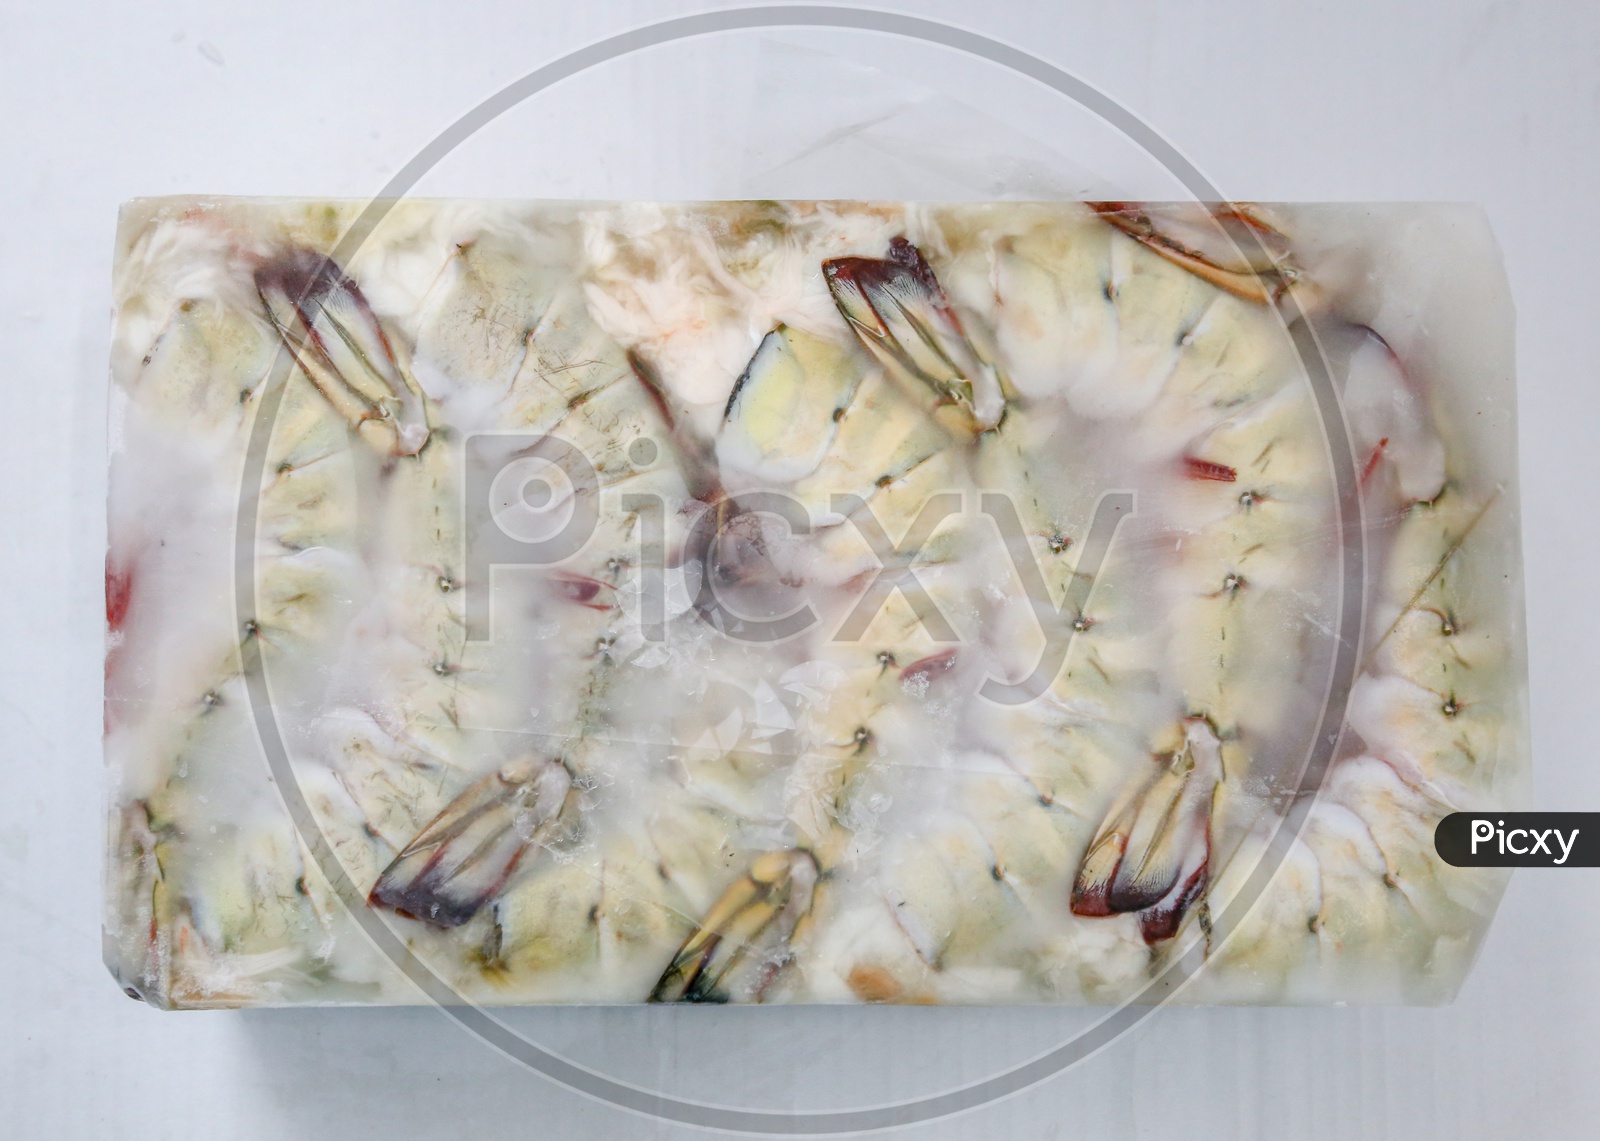 Frozen Block Of Shrimps or Prawns With Product Of India label In a Seafood Exporting Company